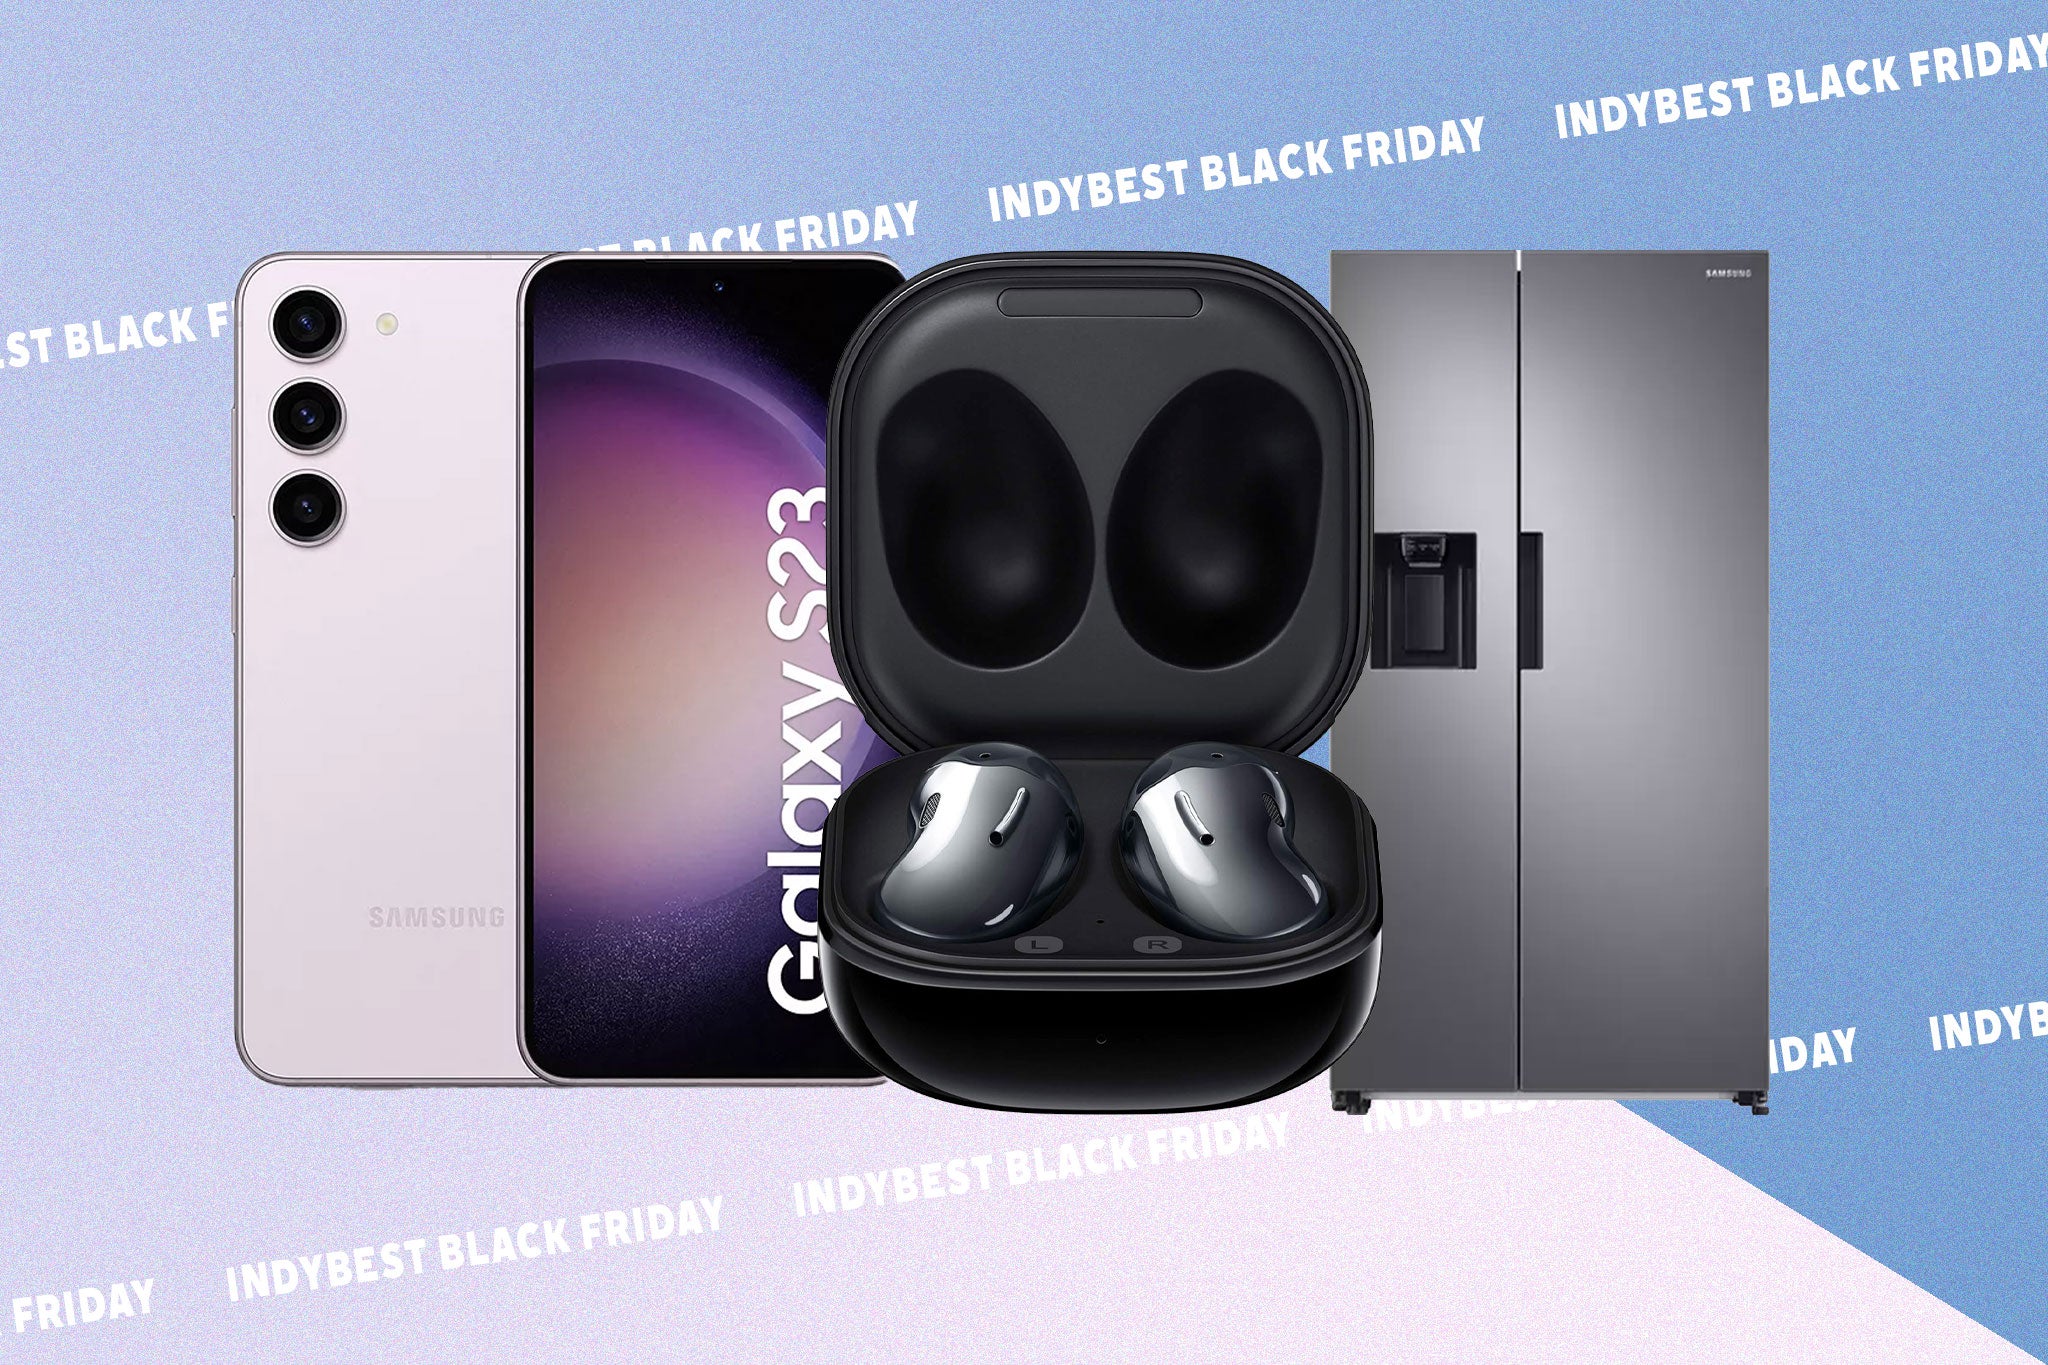 indybest, samsung, amazon, android, black friday, best samsung black friday deals on galaxy phones, appliances and more